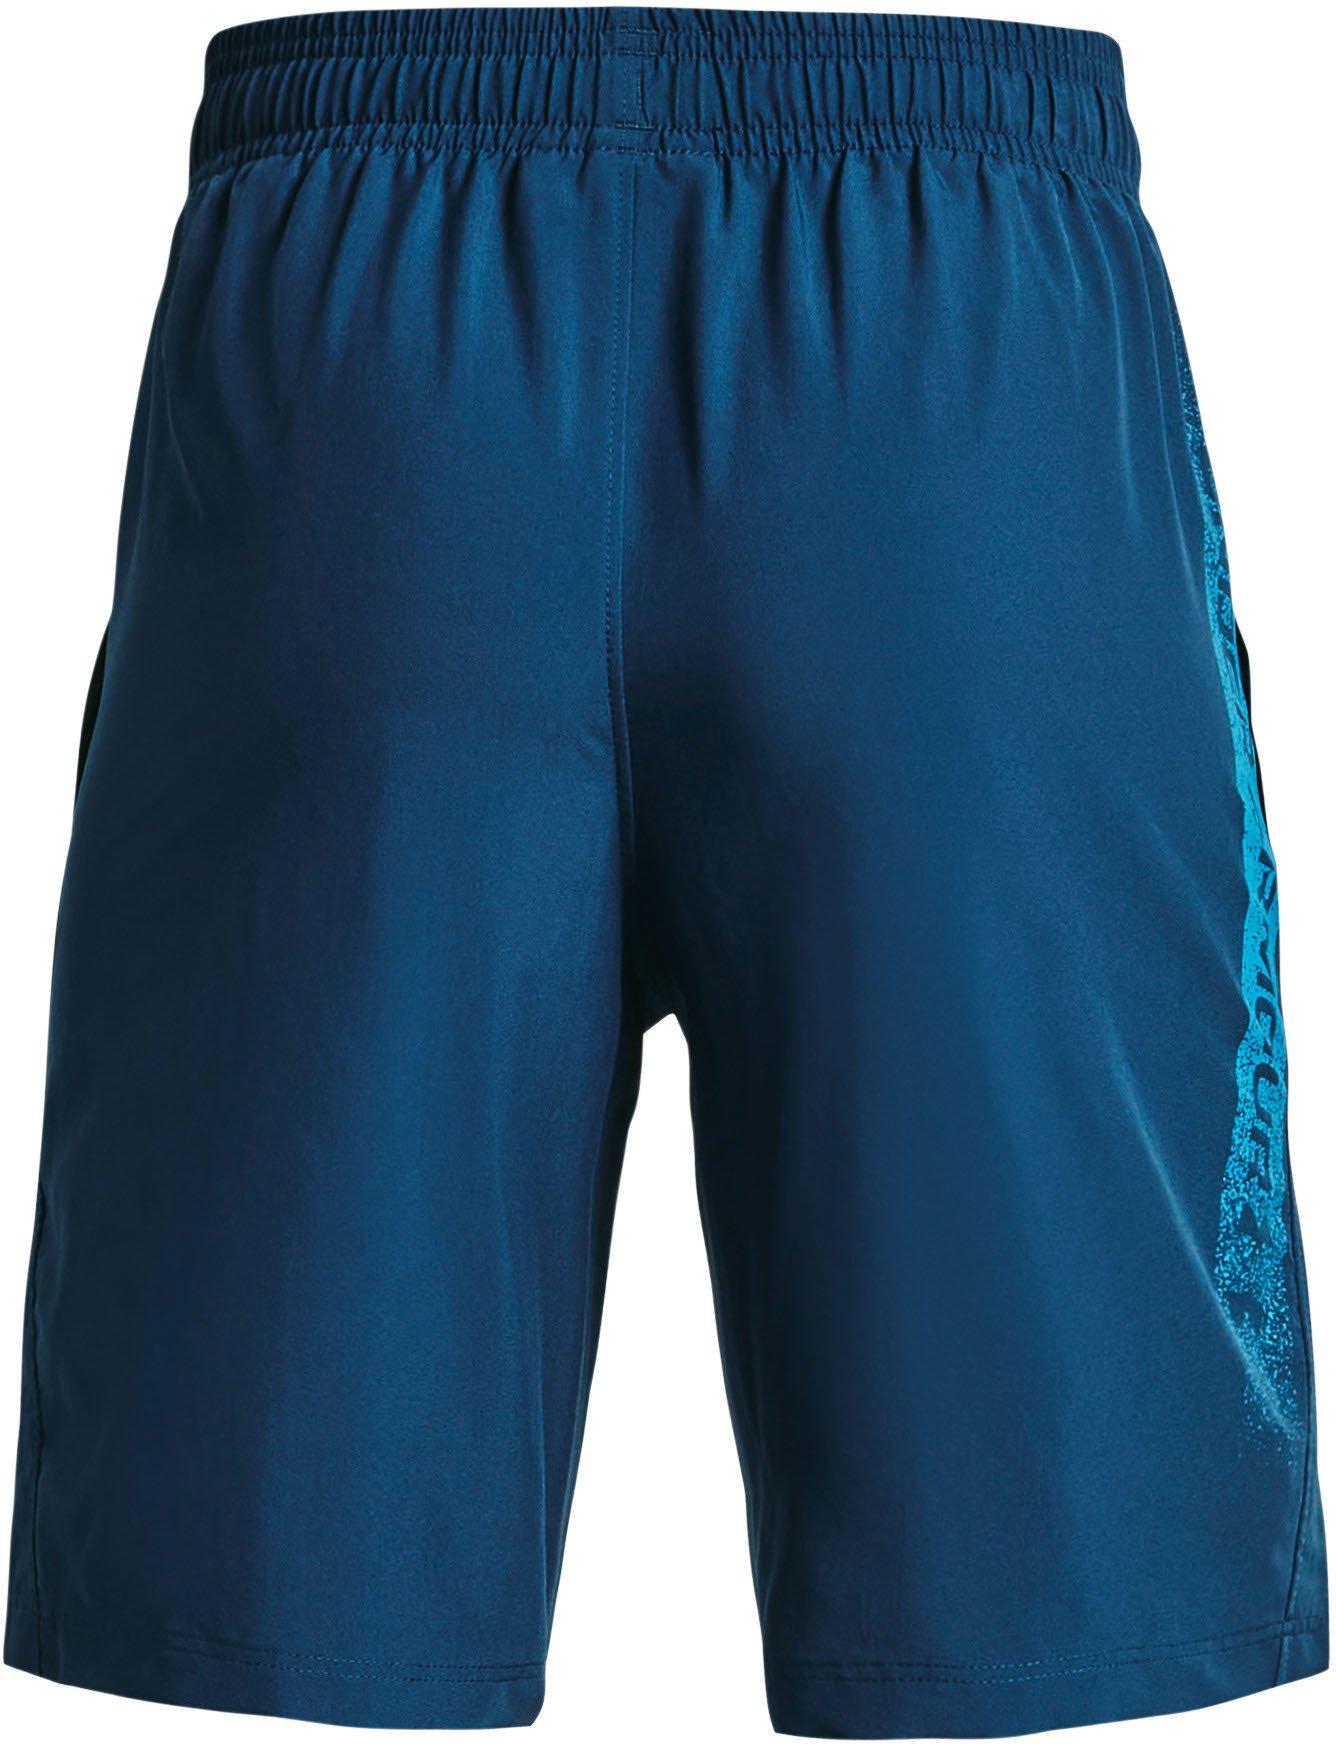 Under Armour Woven Graphic Shorts-BLU S